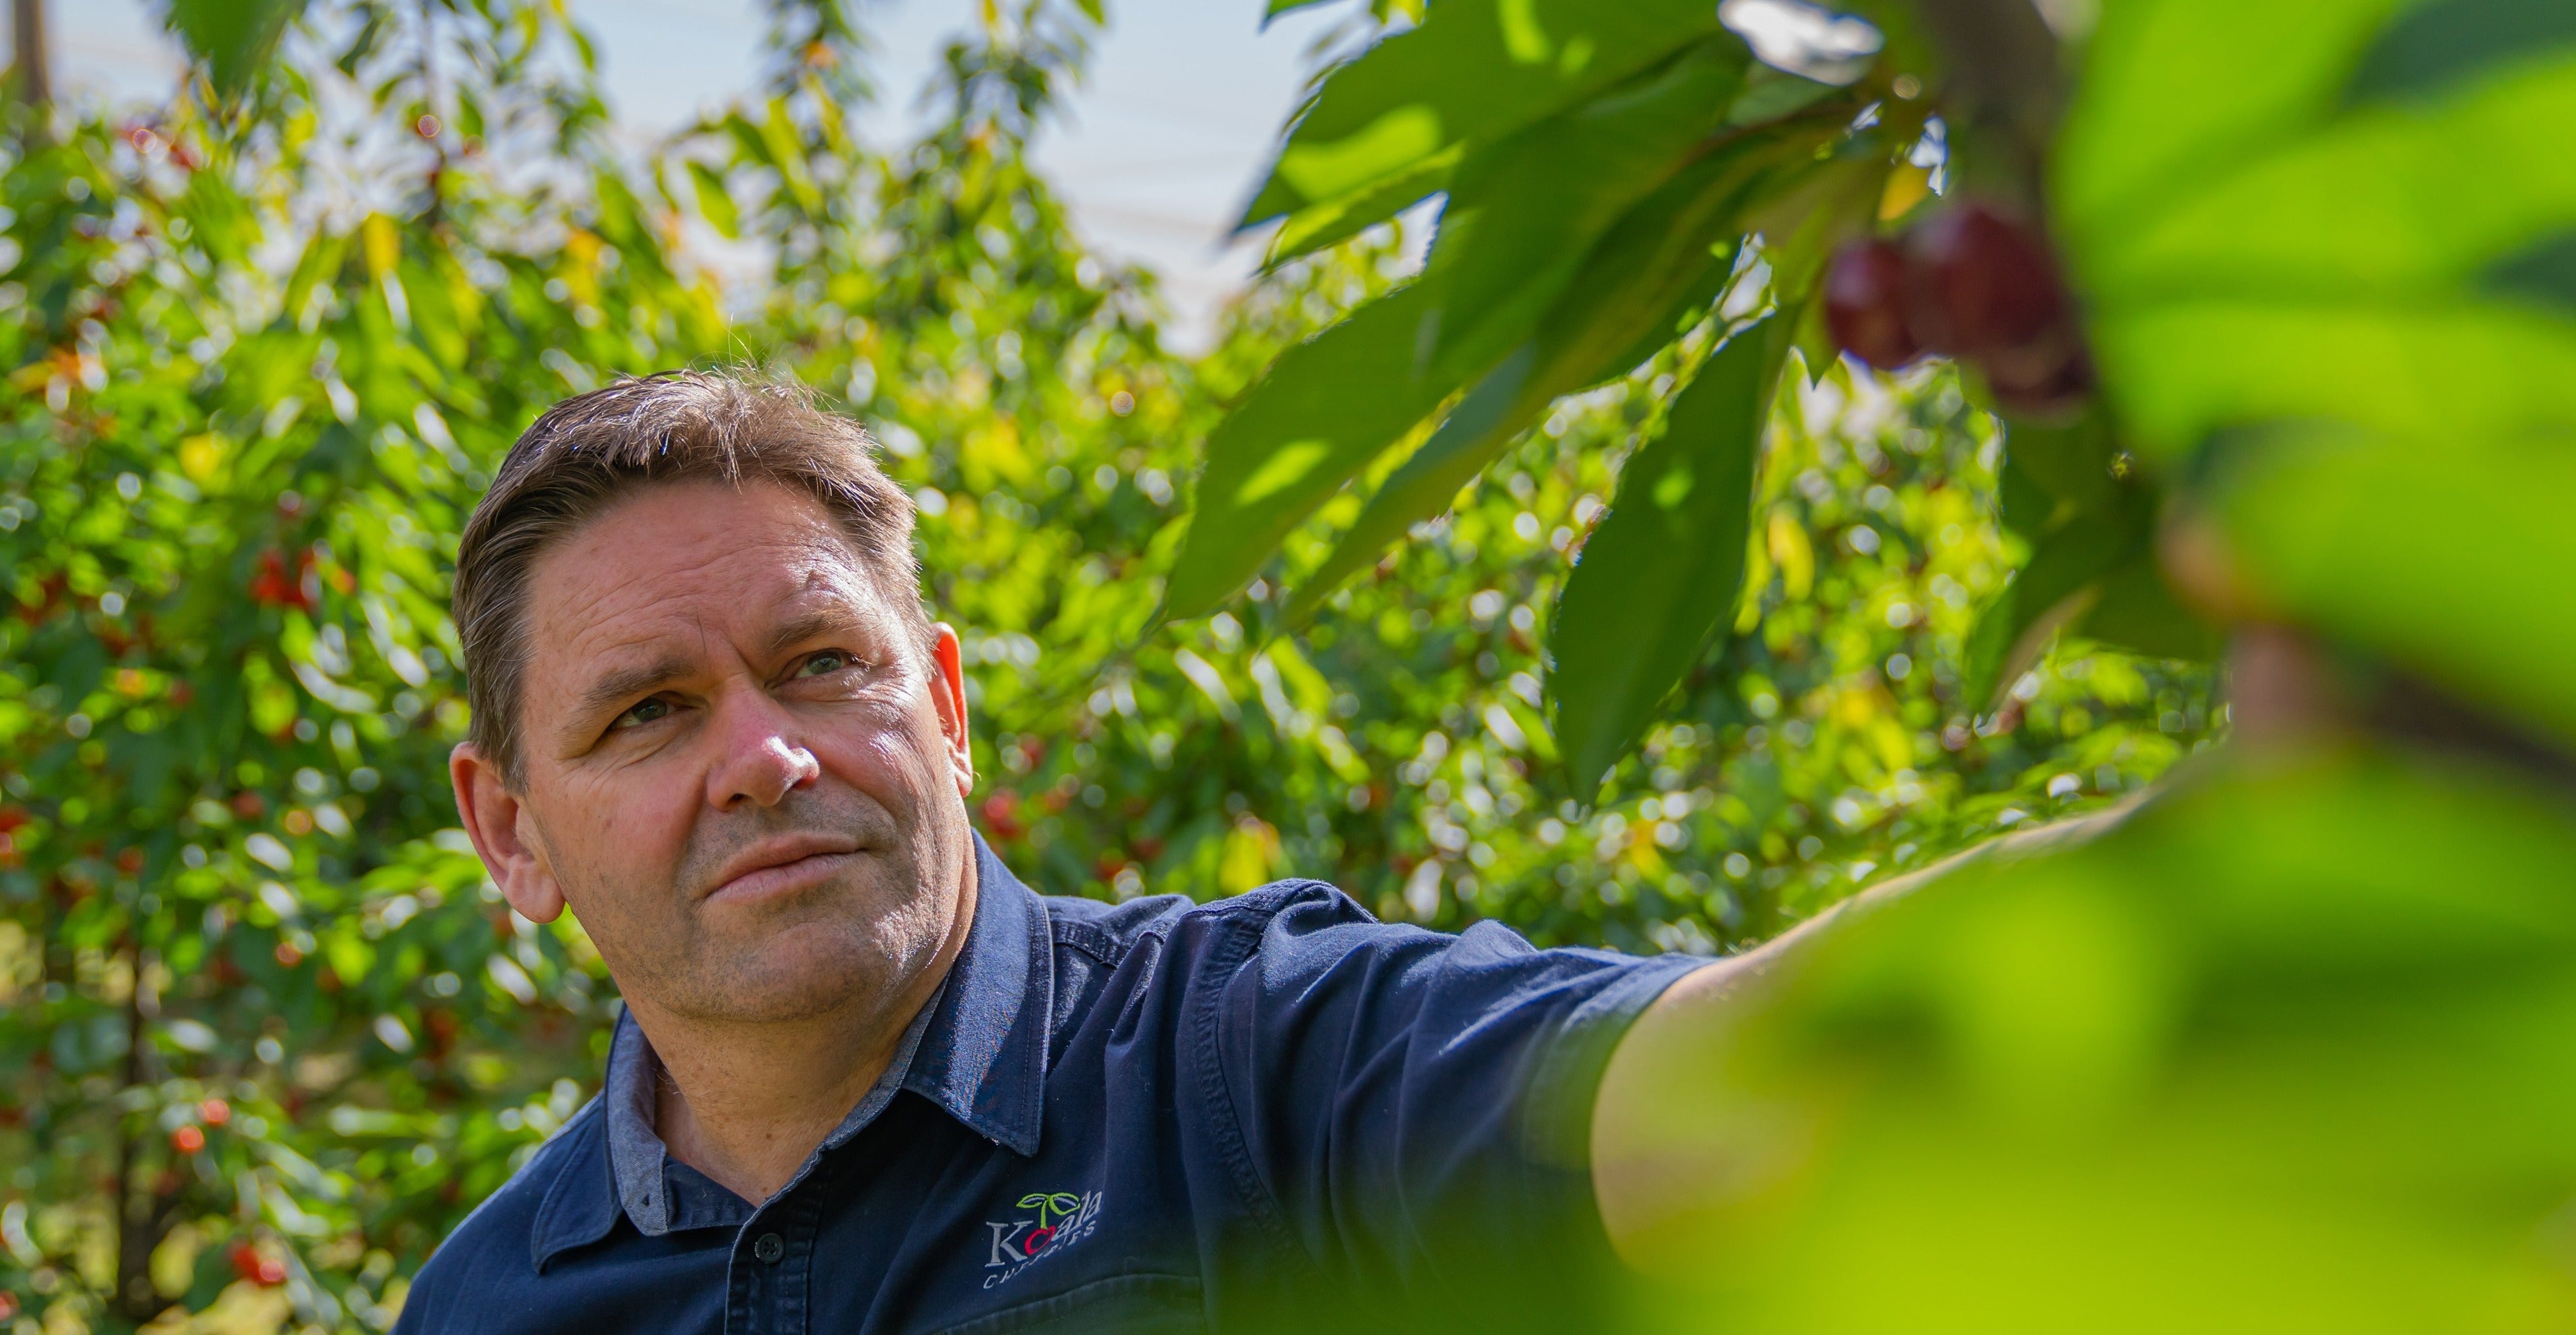 Michael Rouget CEO of Koala Cherries close up photo looking at Cherries on the tree